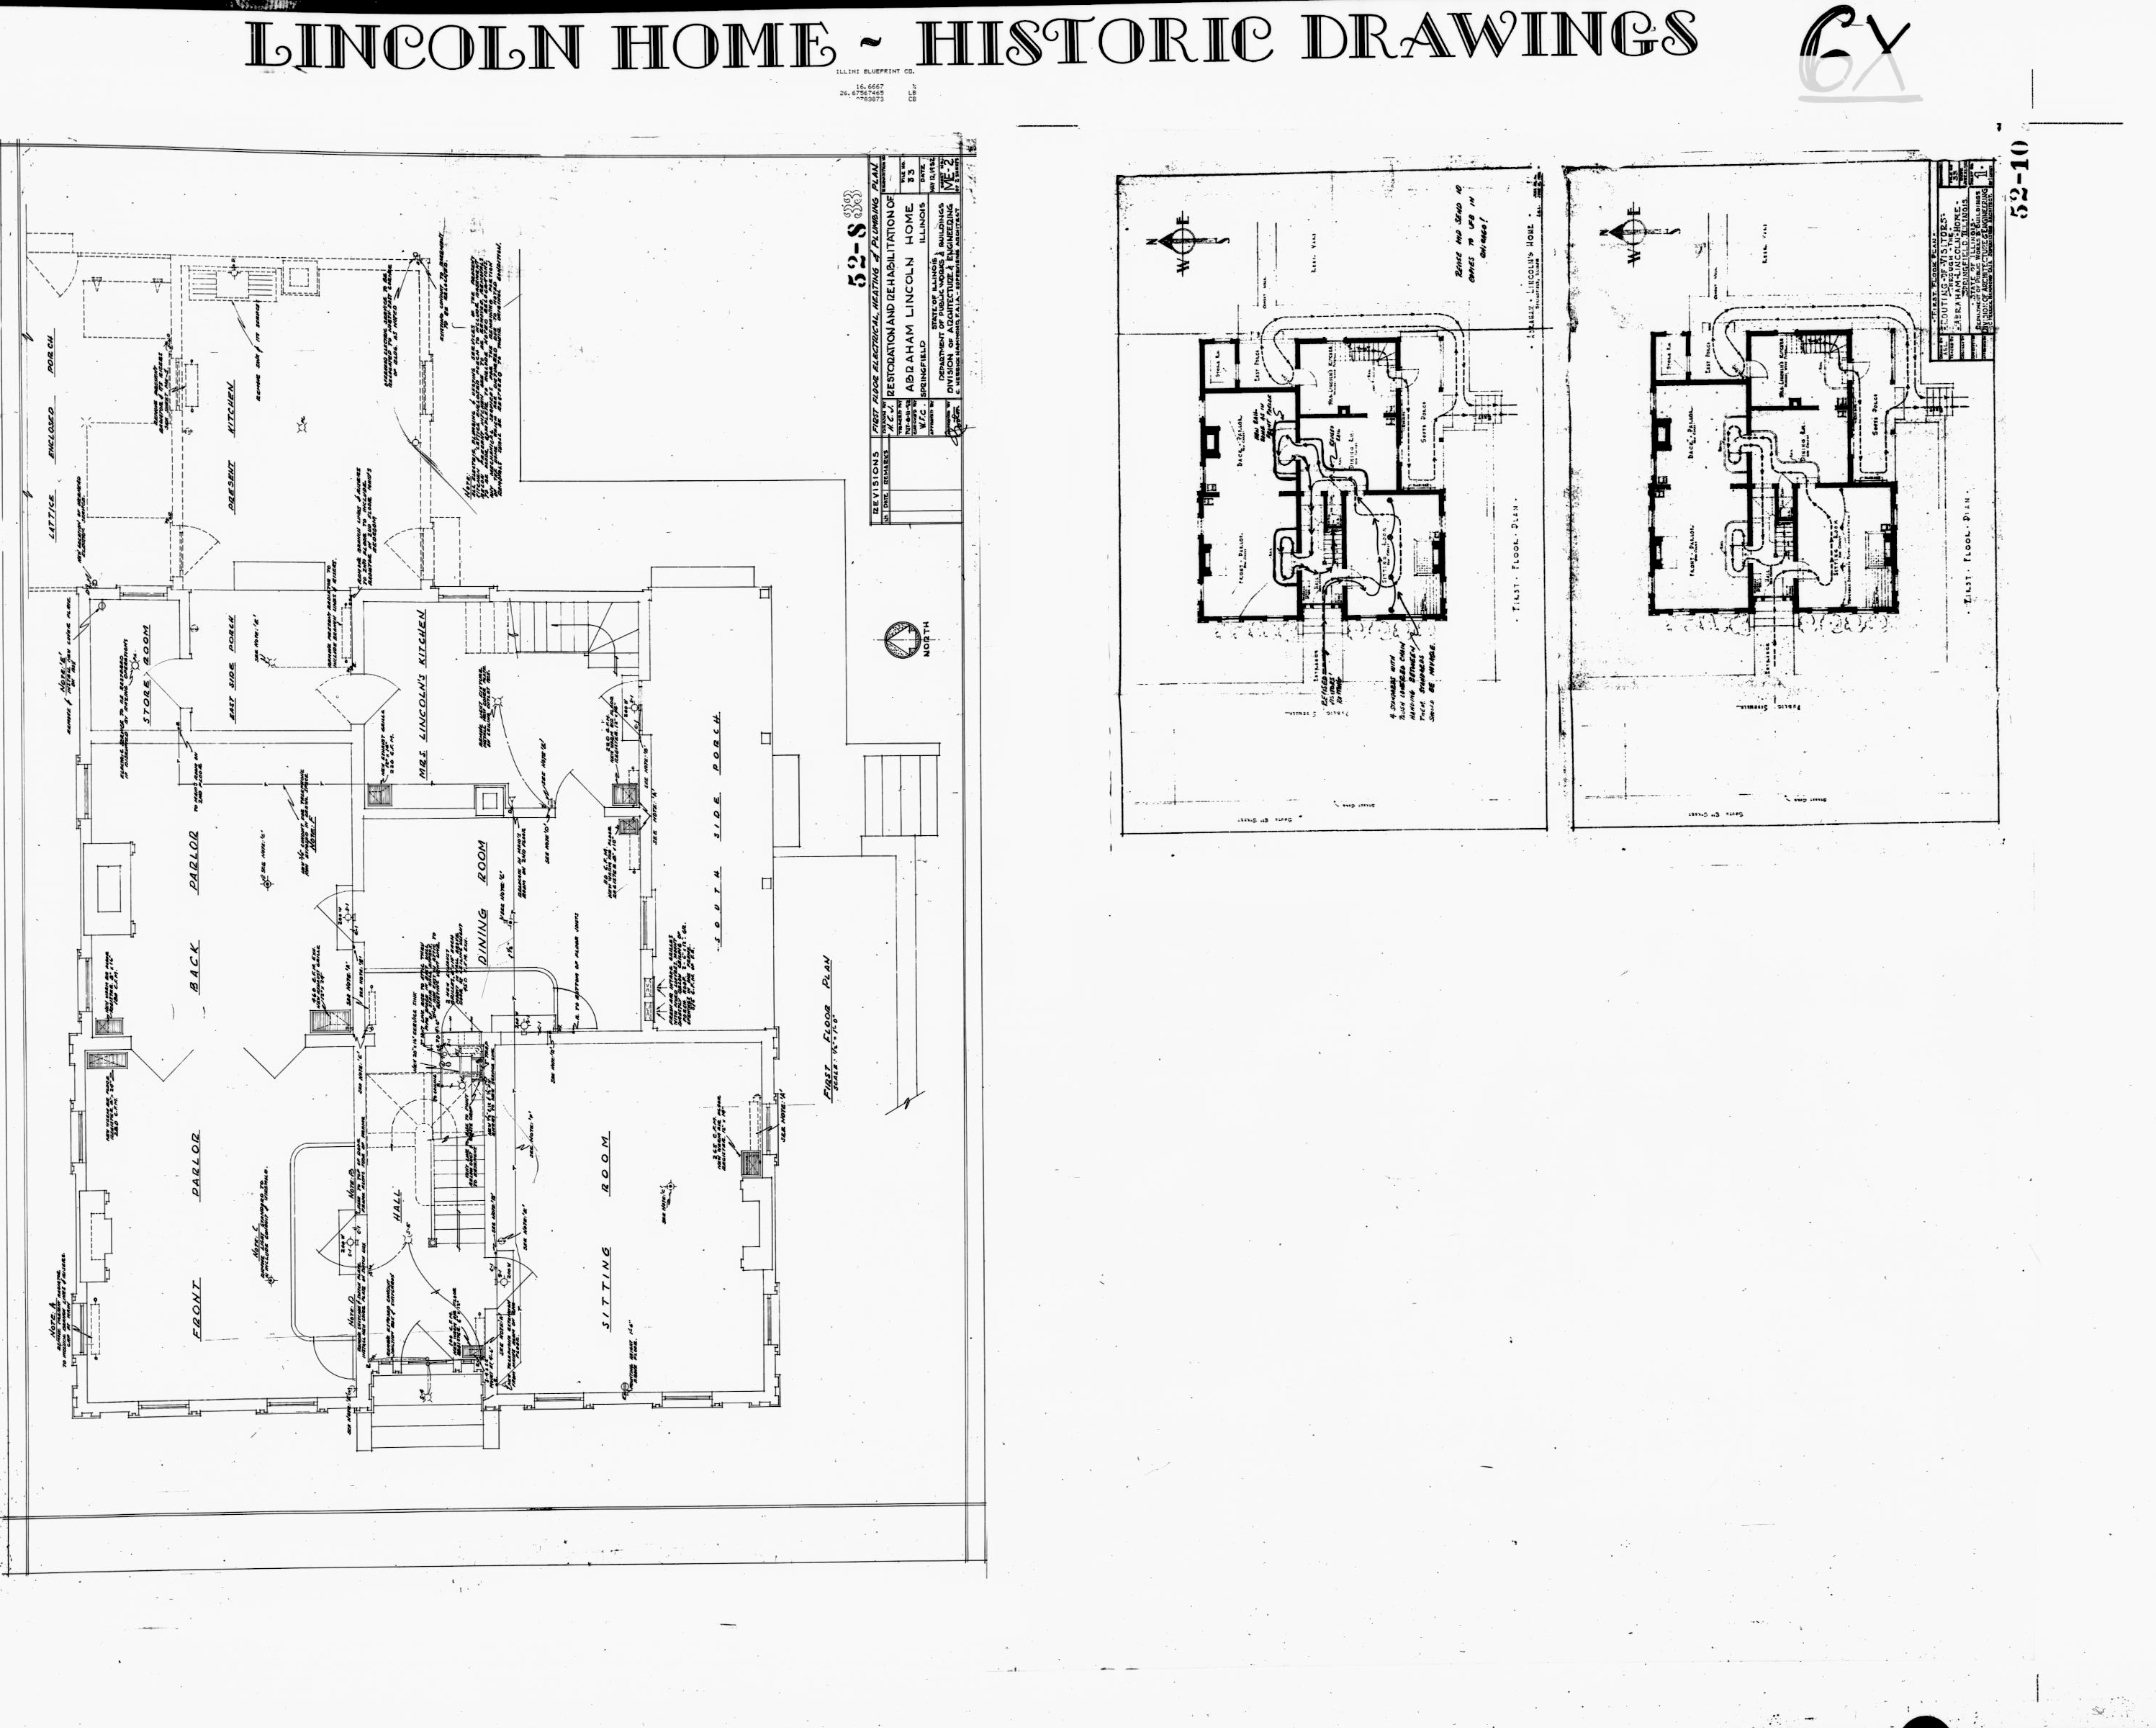 Lincoln Home - Historic Drawings - Restoration and Rehab - Roof Plan and Handrail Detail 33 Lincoln, home, historic drawings, restoration & rehab, elec/htg/plbg, first floor, visitor circulation plan